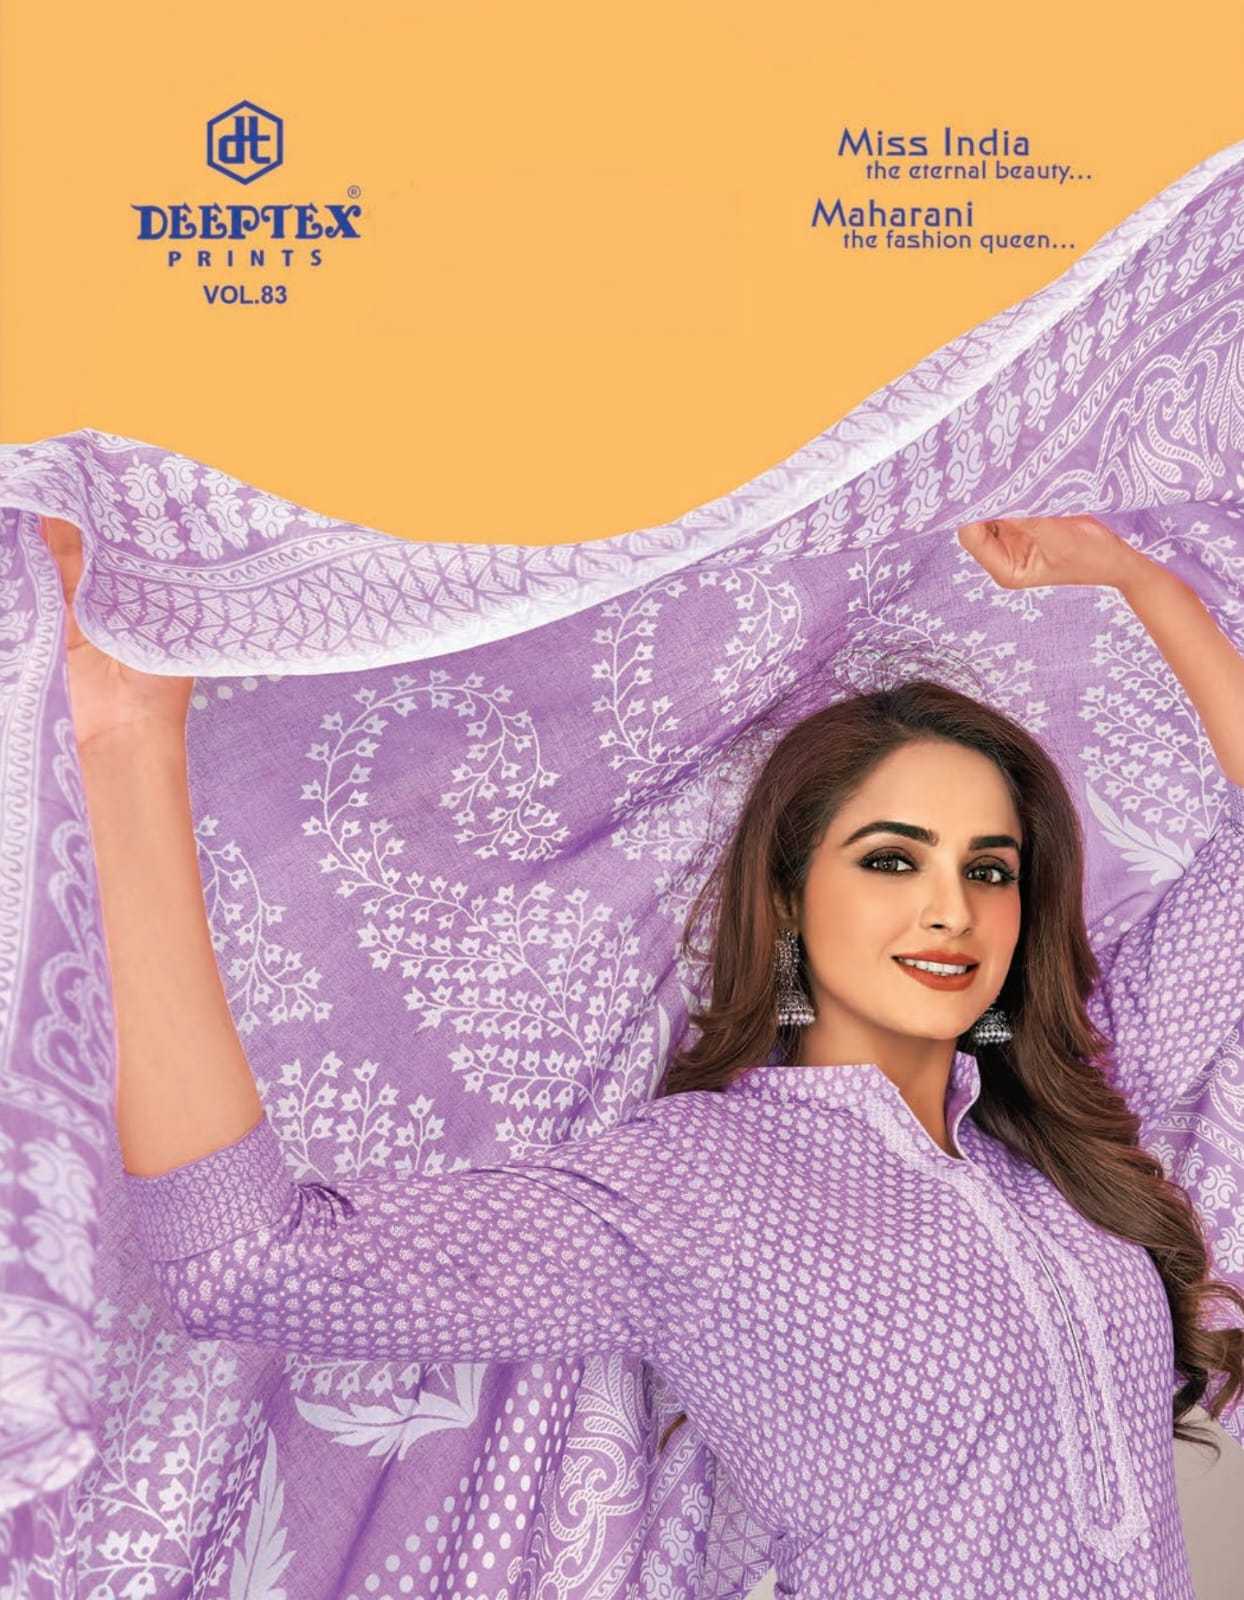 deeptex prints miss india vol 83 casual wear cotton printed dress material 